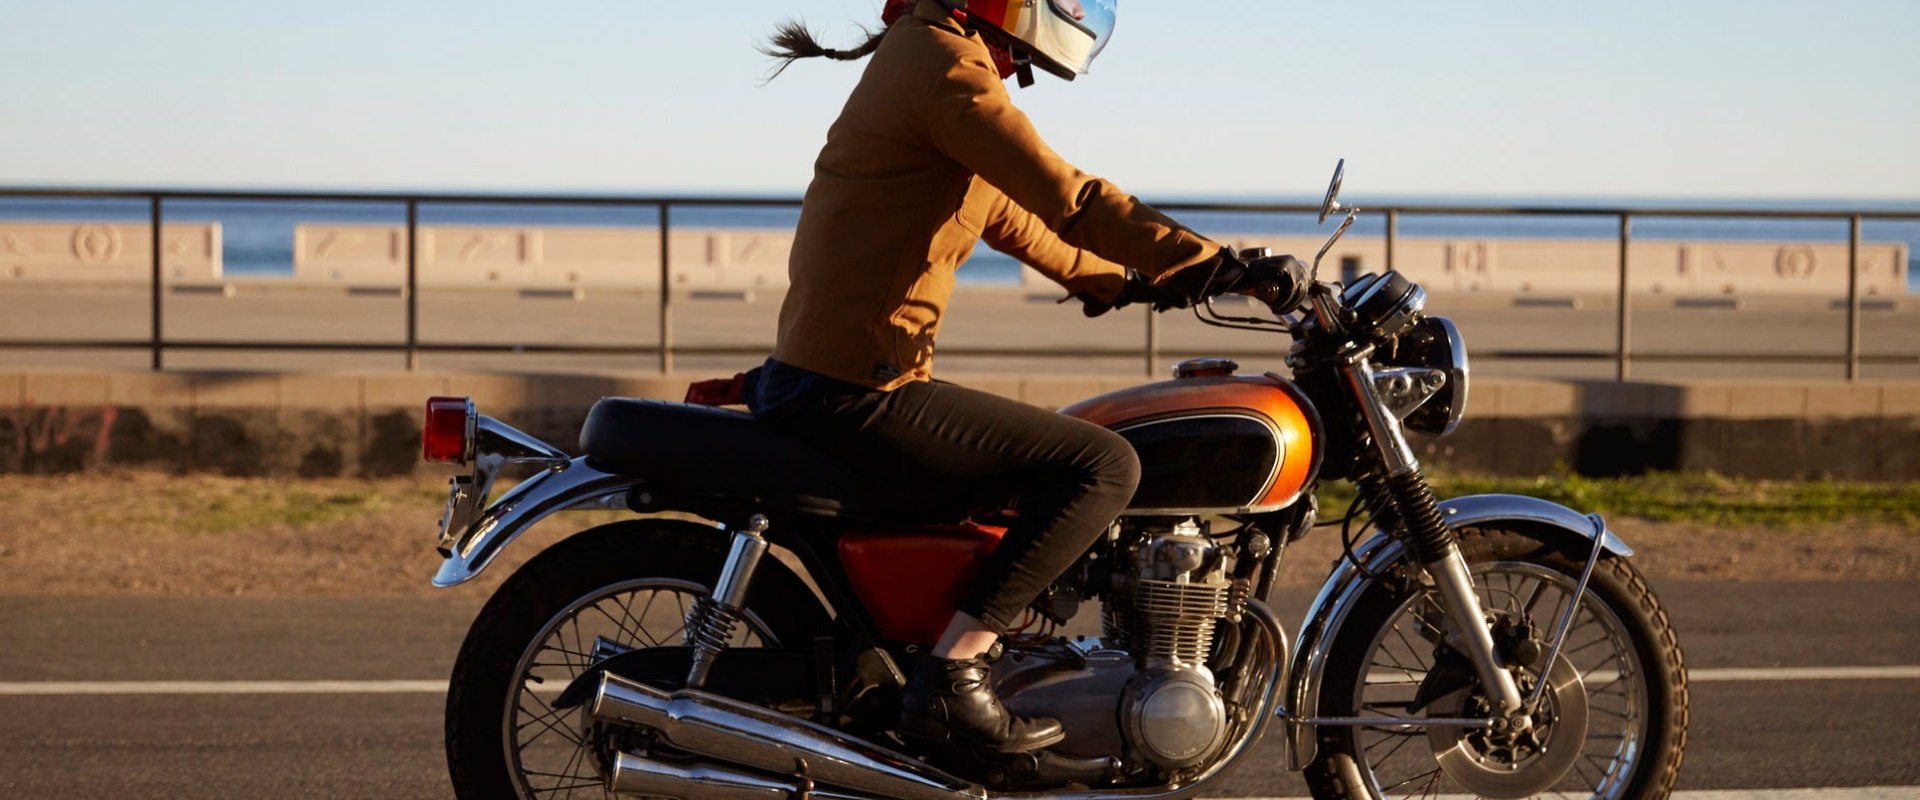 How Much Does Motorcycle Insurance Cost For A 16 Year Old In New York?